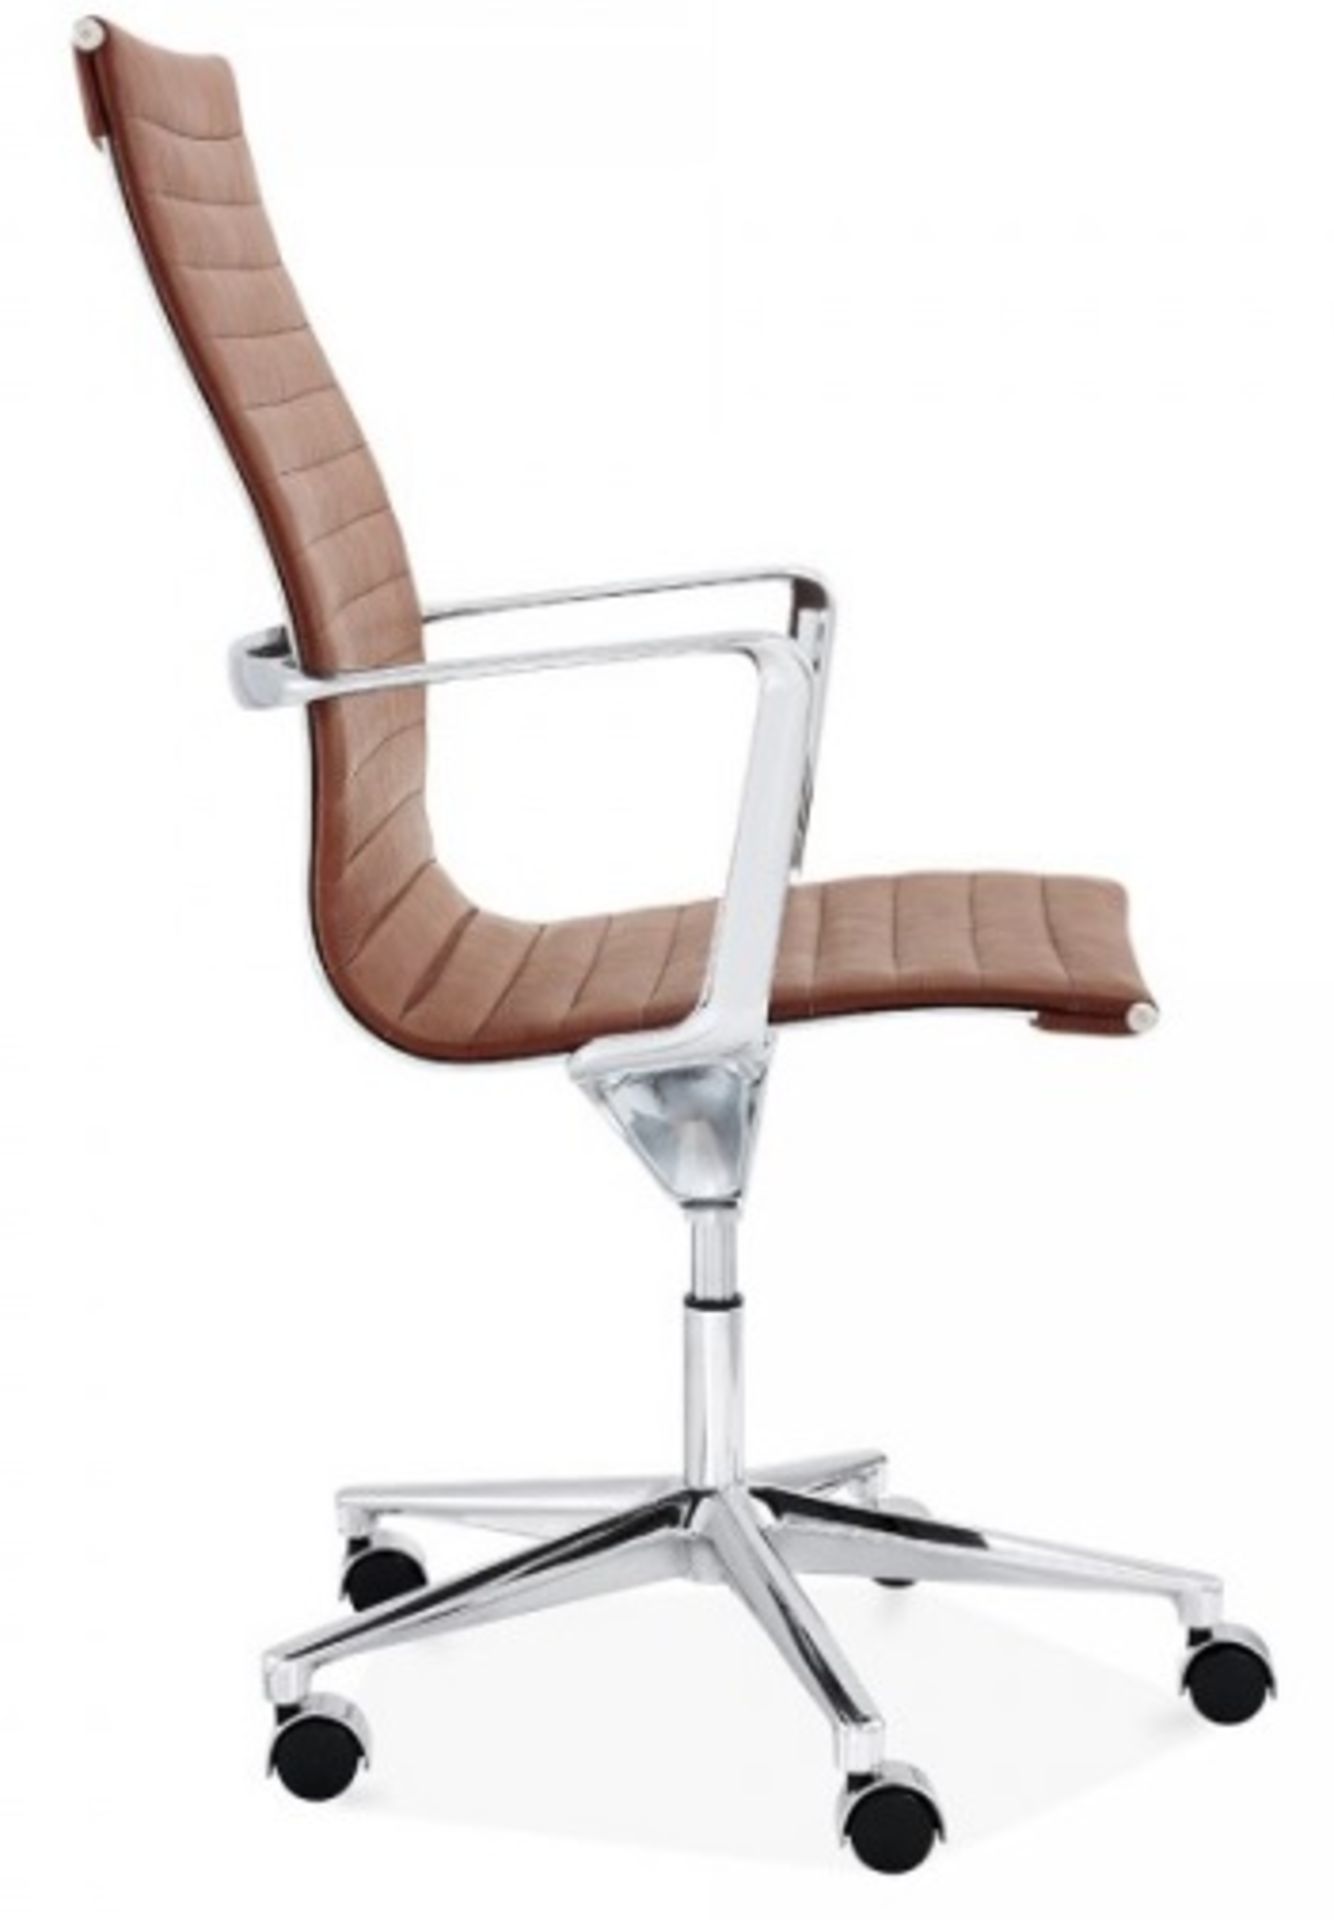 1 x LINEAR Eames-Inspired Ribbed High Back Office Swivel Chair In Brown Leather- New / Unboxed Stock - Bild 3 aus 5